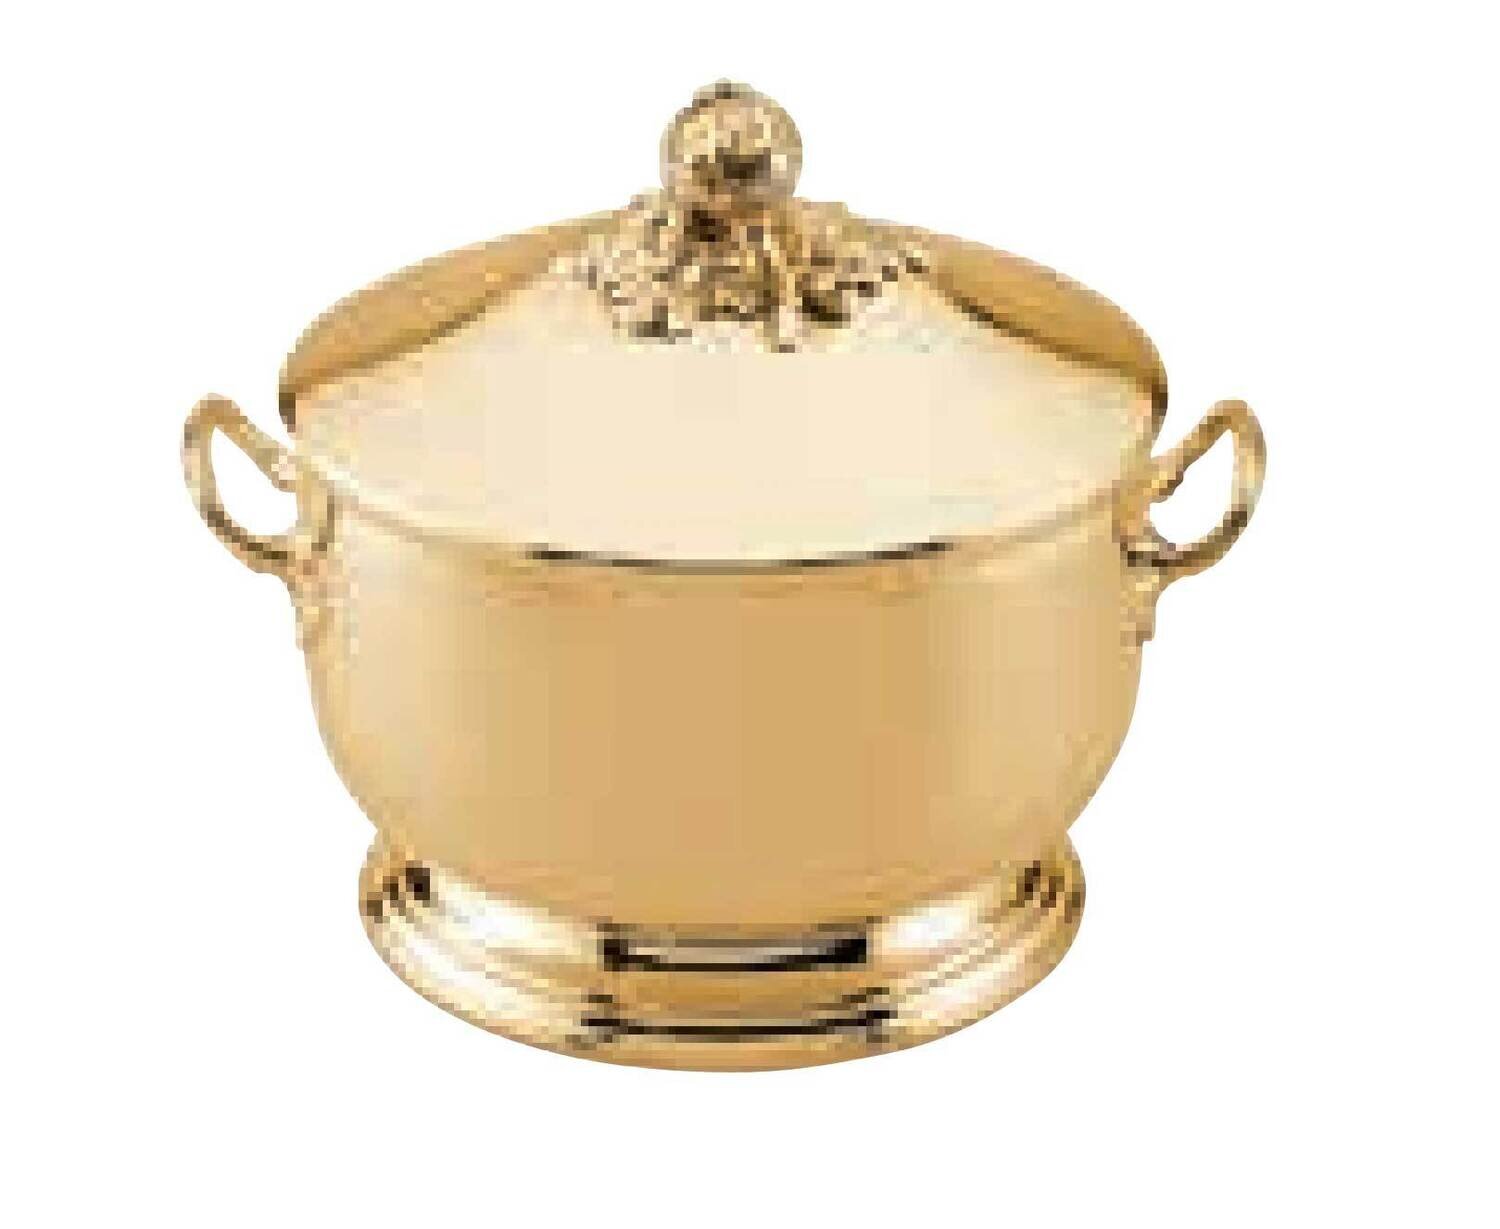 Ercuis Louis XV Centerpiece 7.5 Inch Gold Plated F503020219